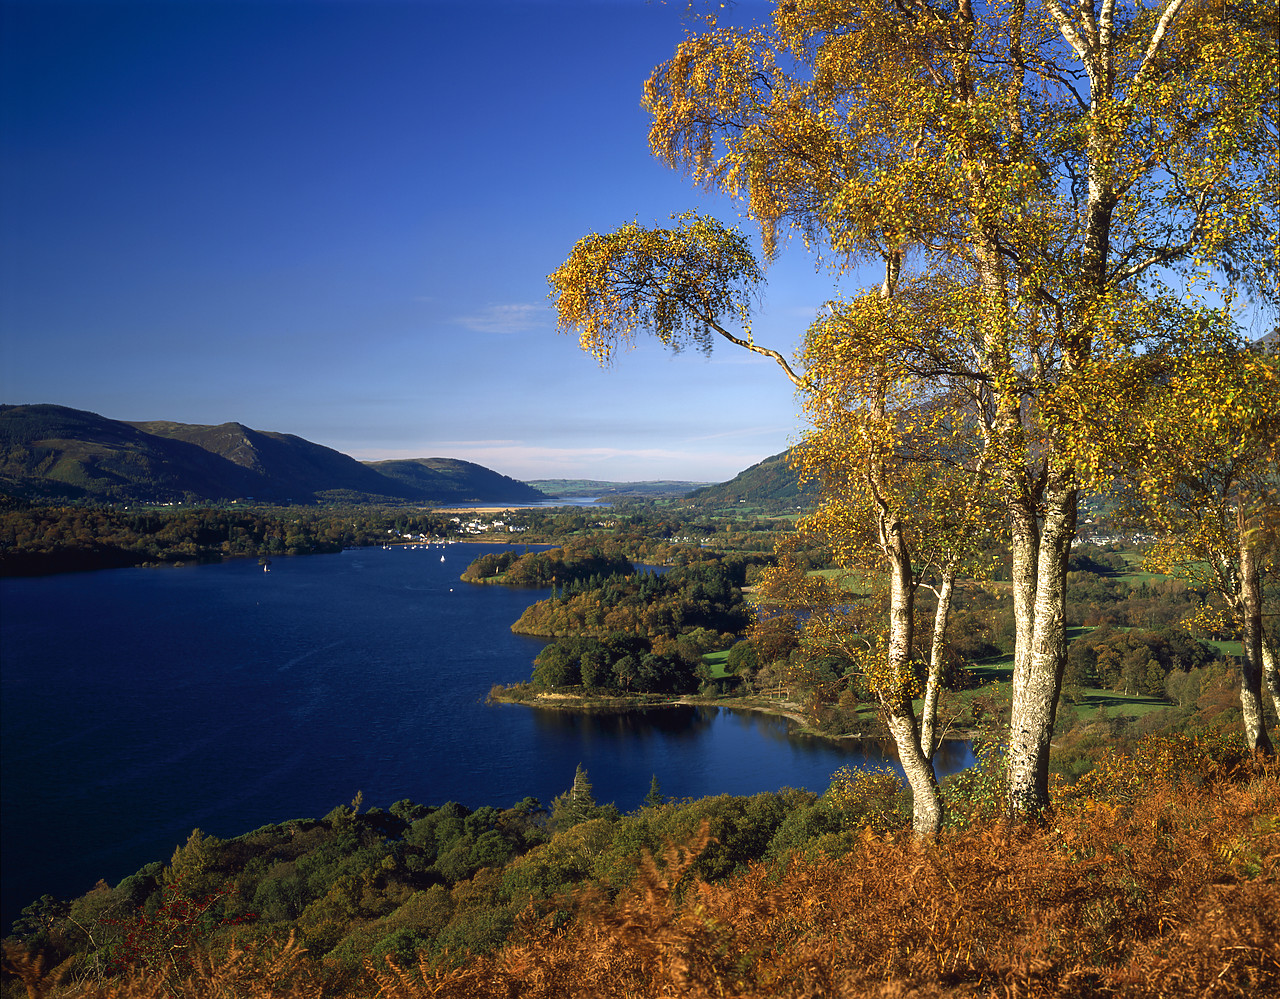 #060768-1 - View over Derwent Water, Lake District National Park, Cumbria, England